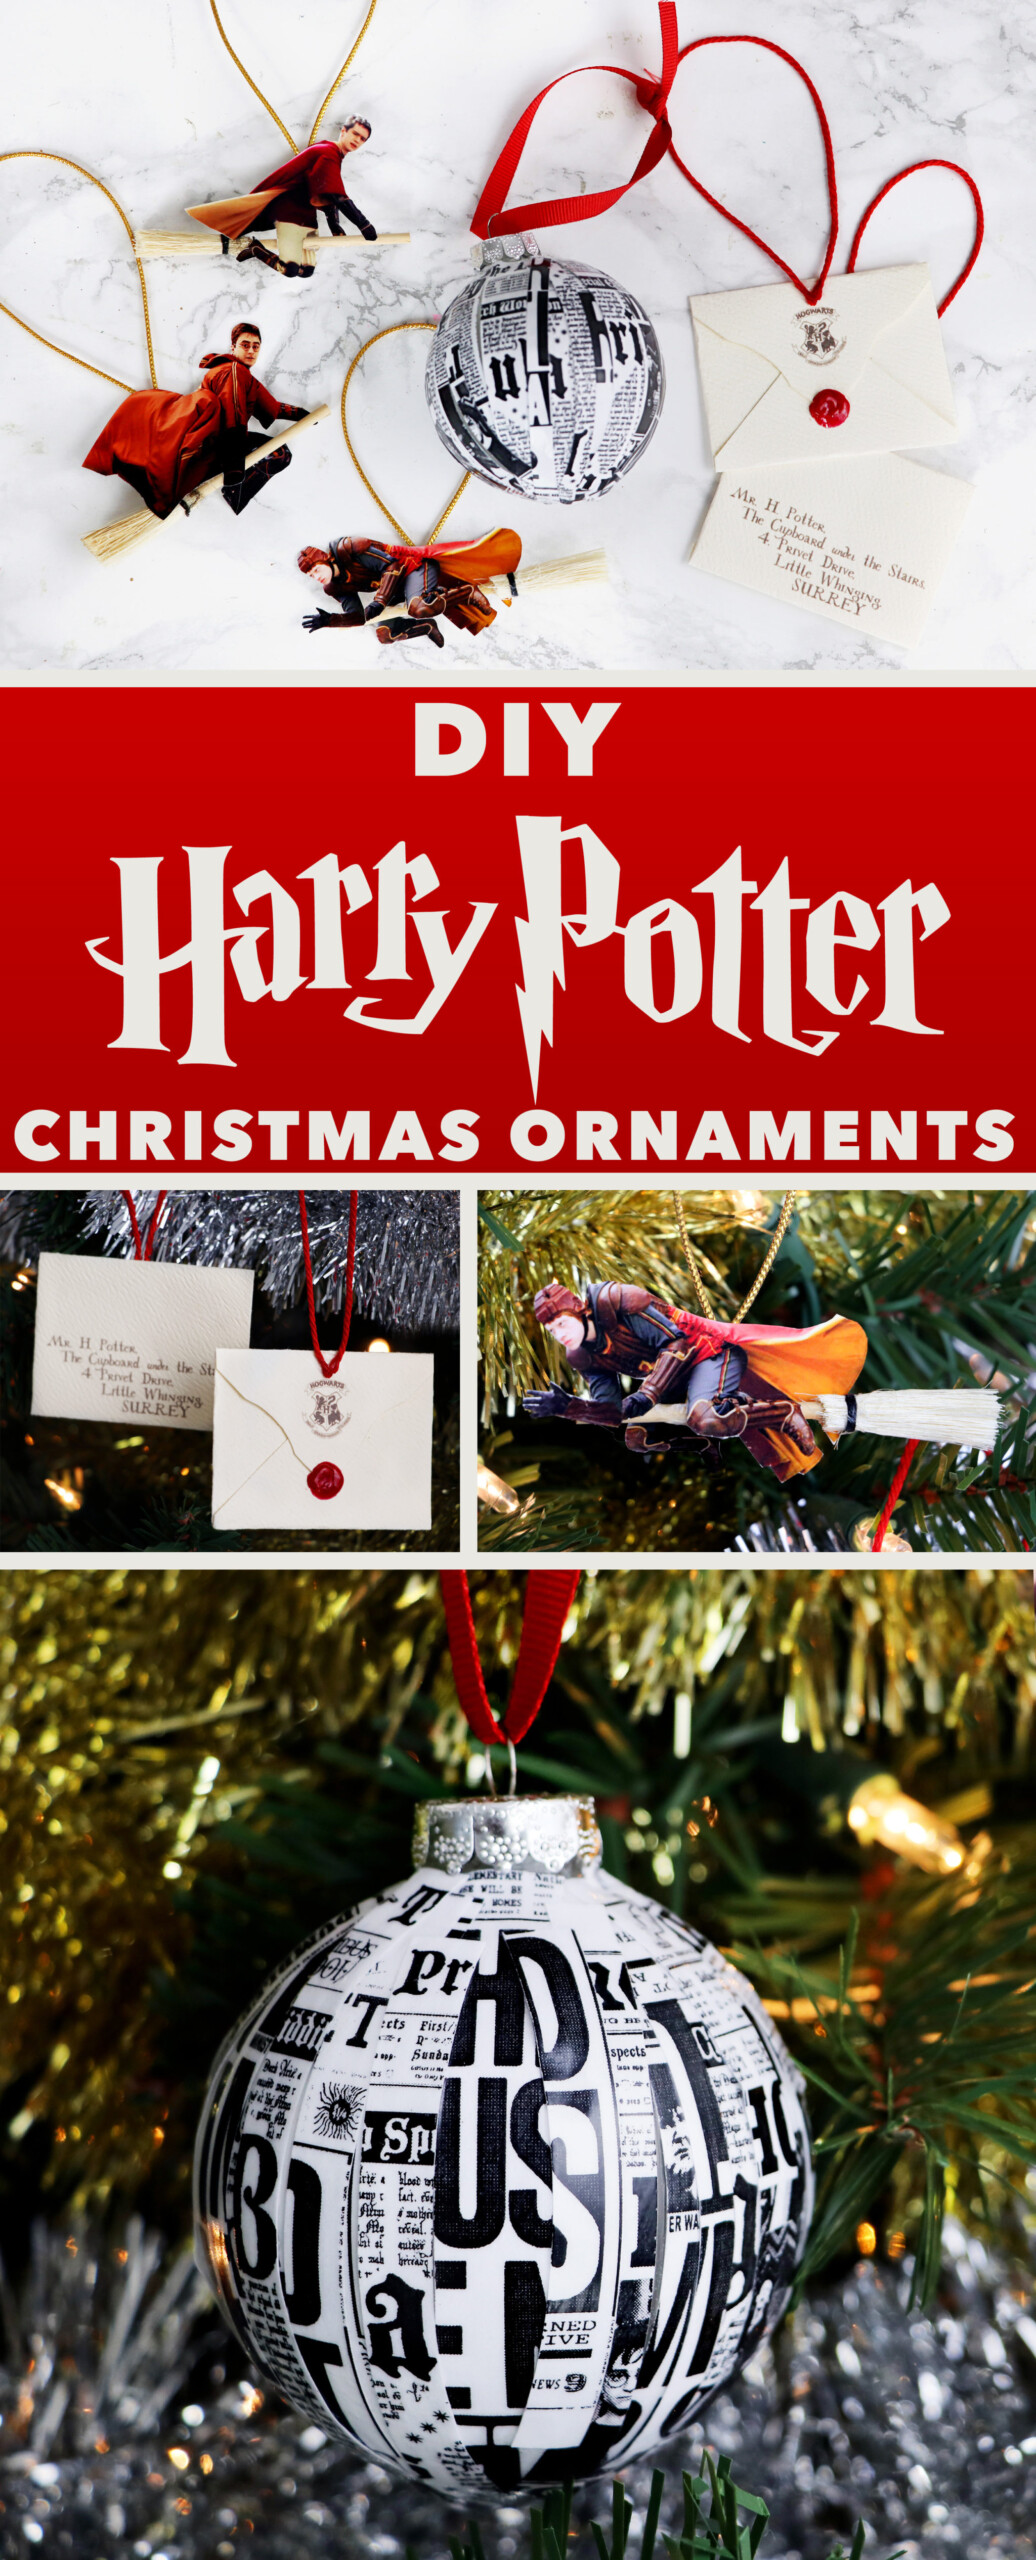 DIY Harry Potter Christmas Ornaments Project For Awesome 2016 Karen